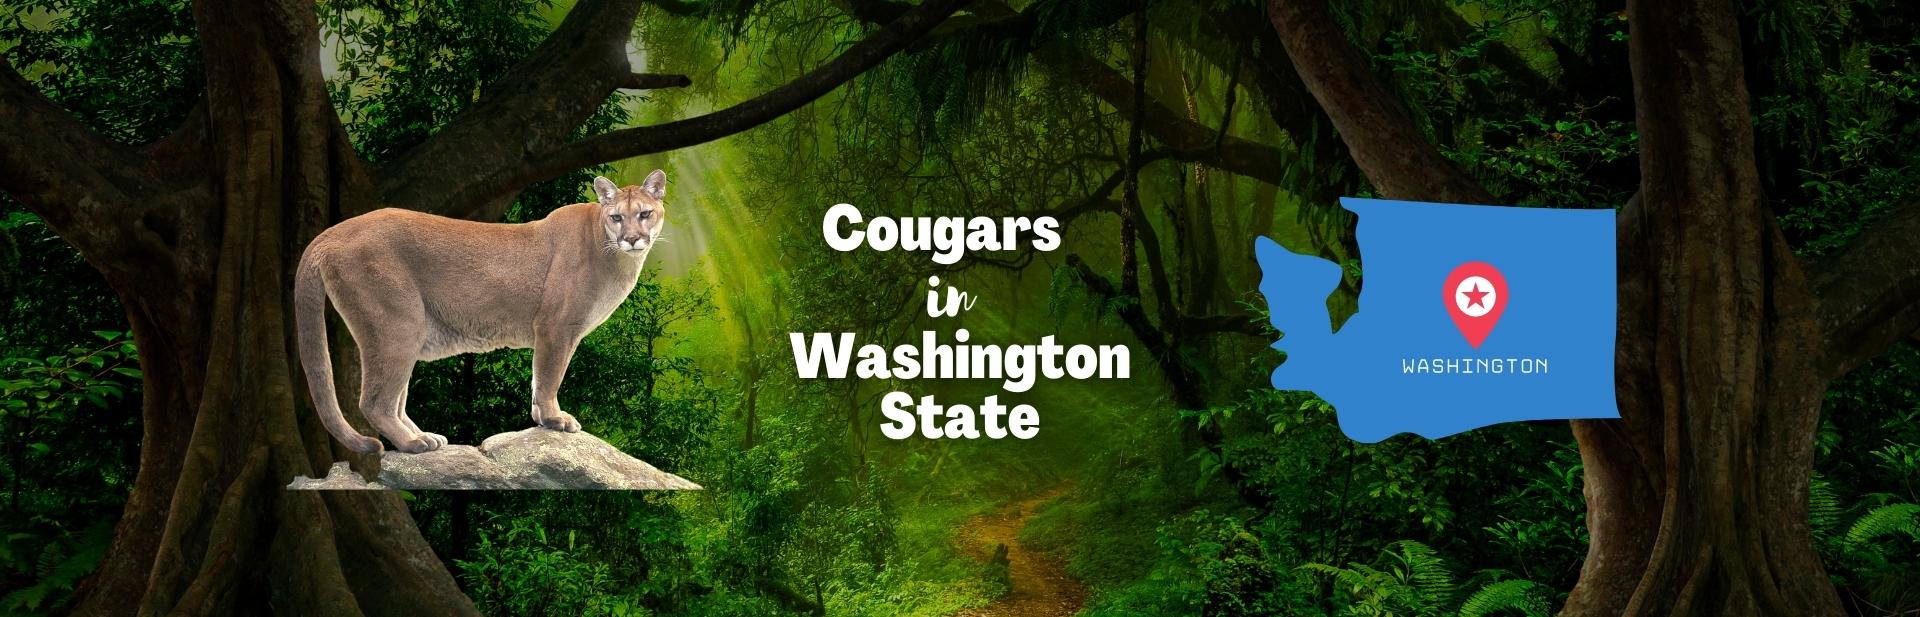 Cougars in Washington State: History, Habitat, and More!